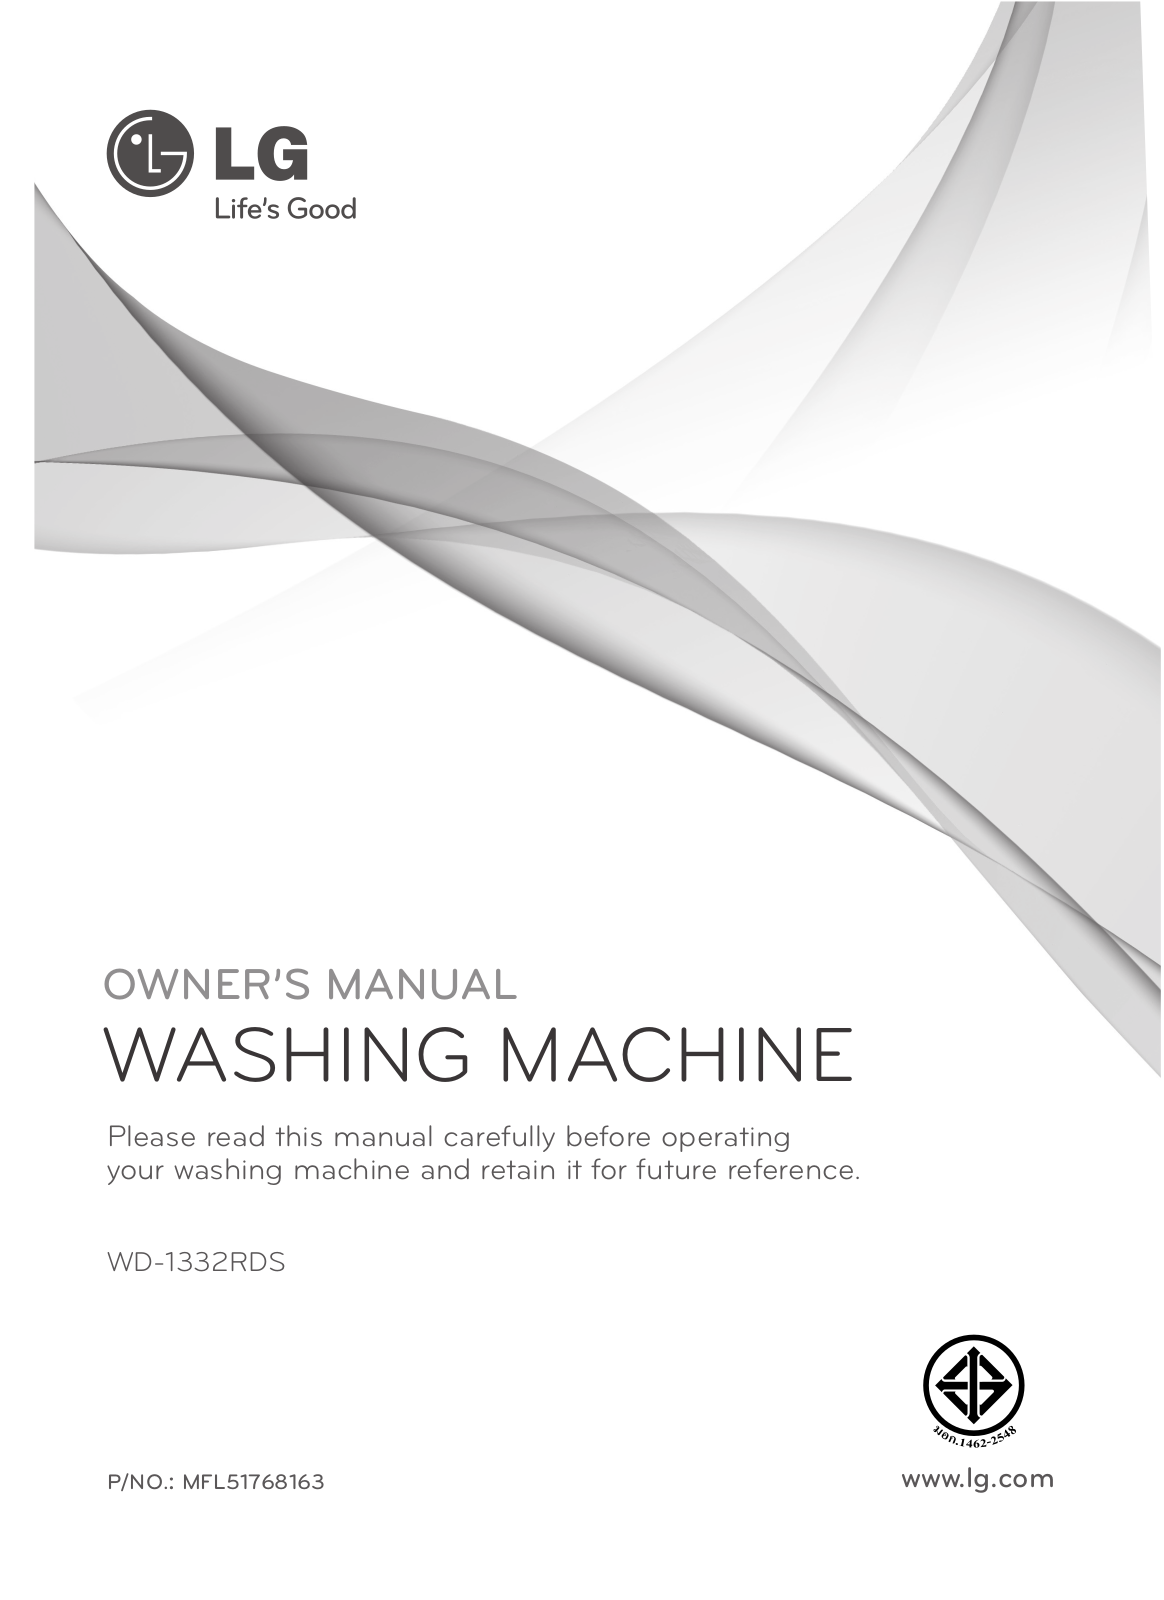 Lg WD-1332RDS Owners Manual